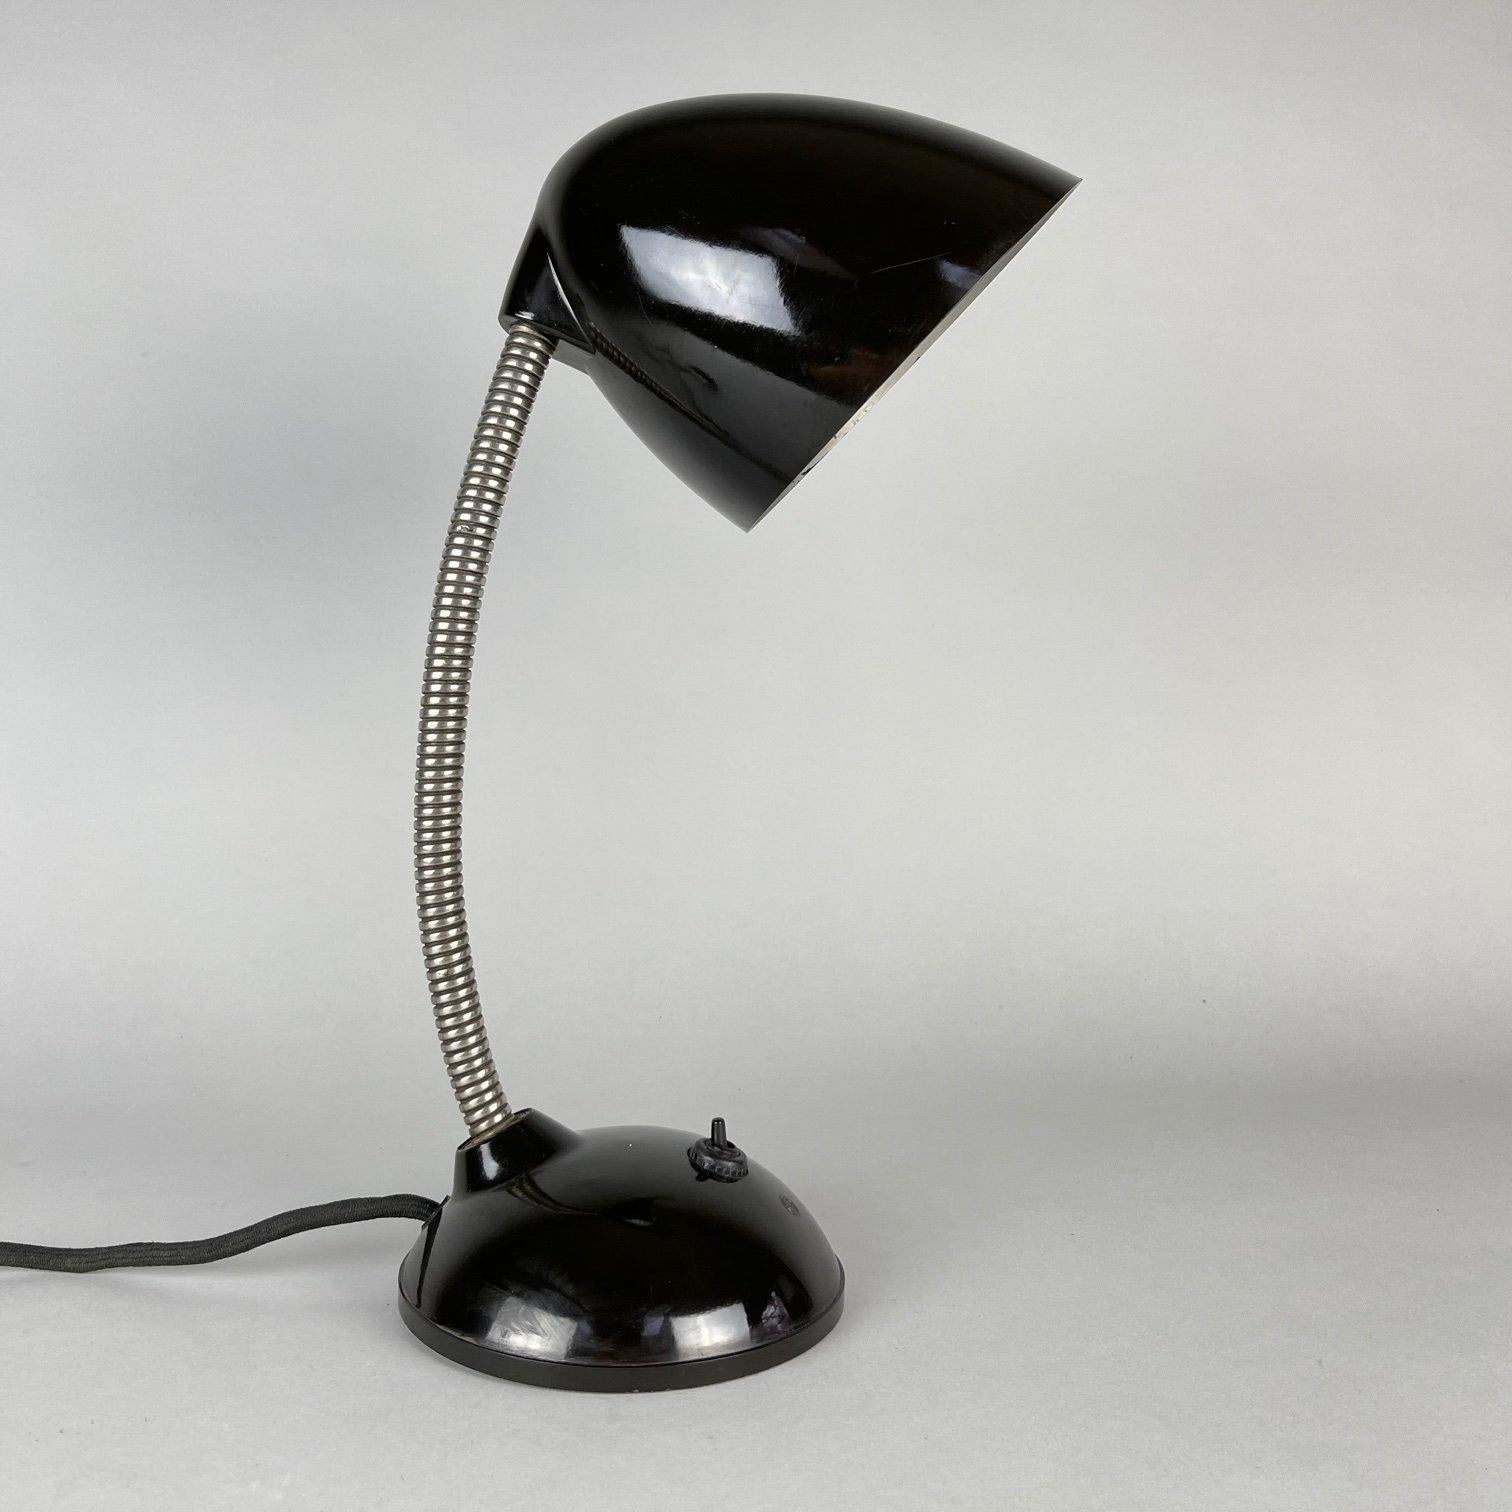 Iconic table lamp by Eric Kirkman Cole was produced in Czecholovakia. Very good original condition. Fully functional.